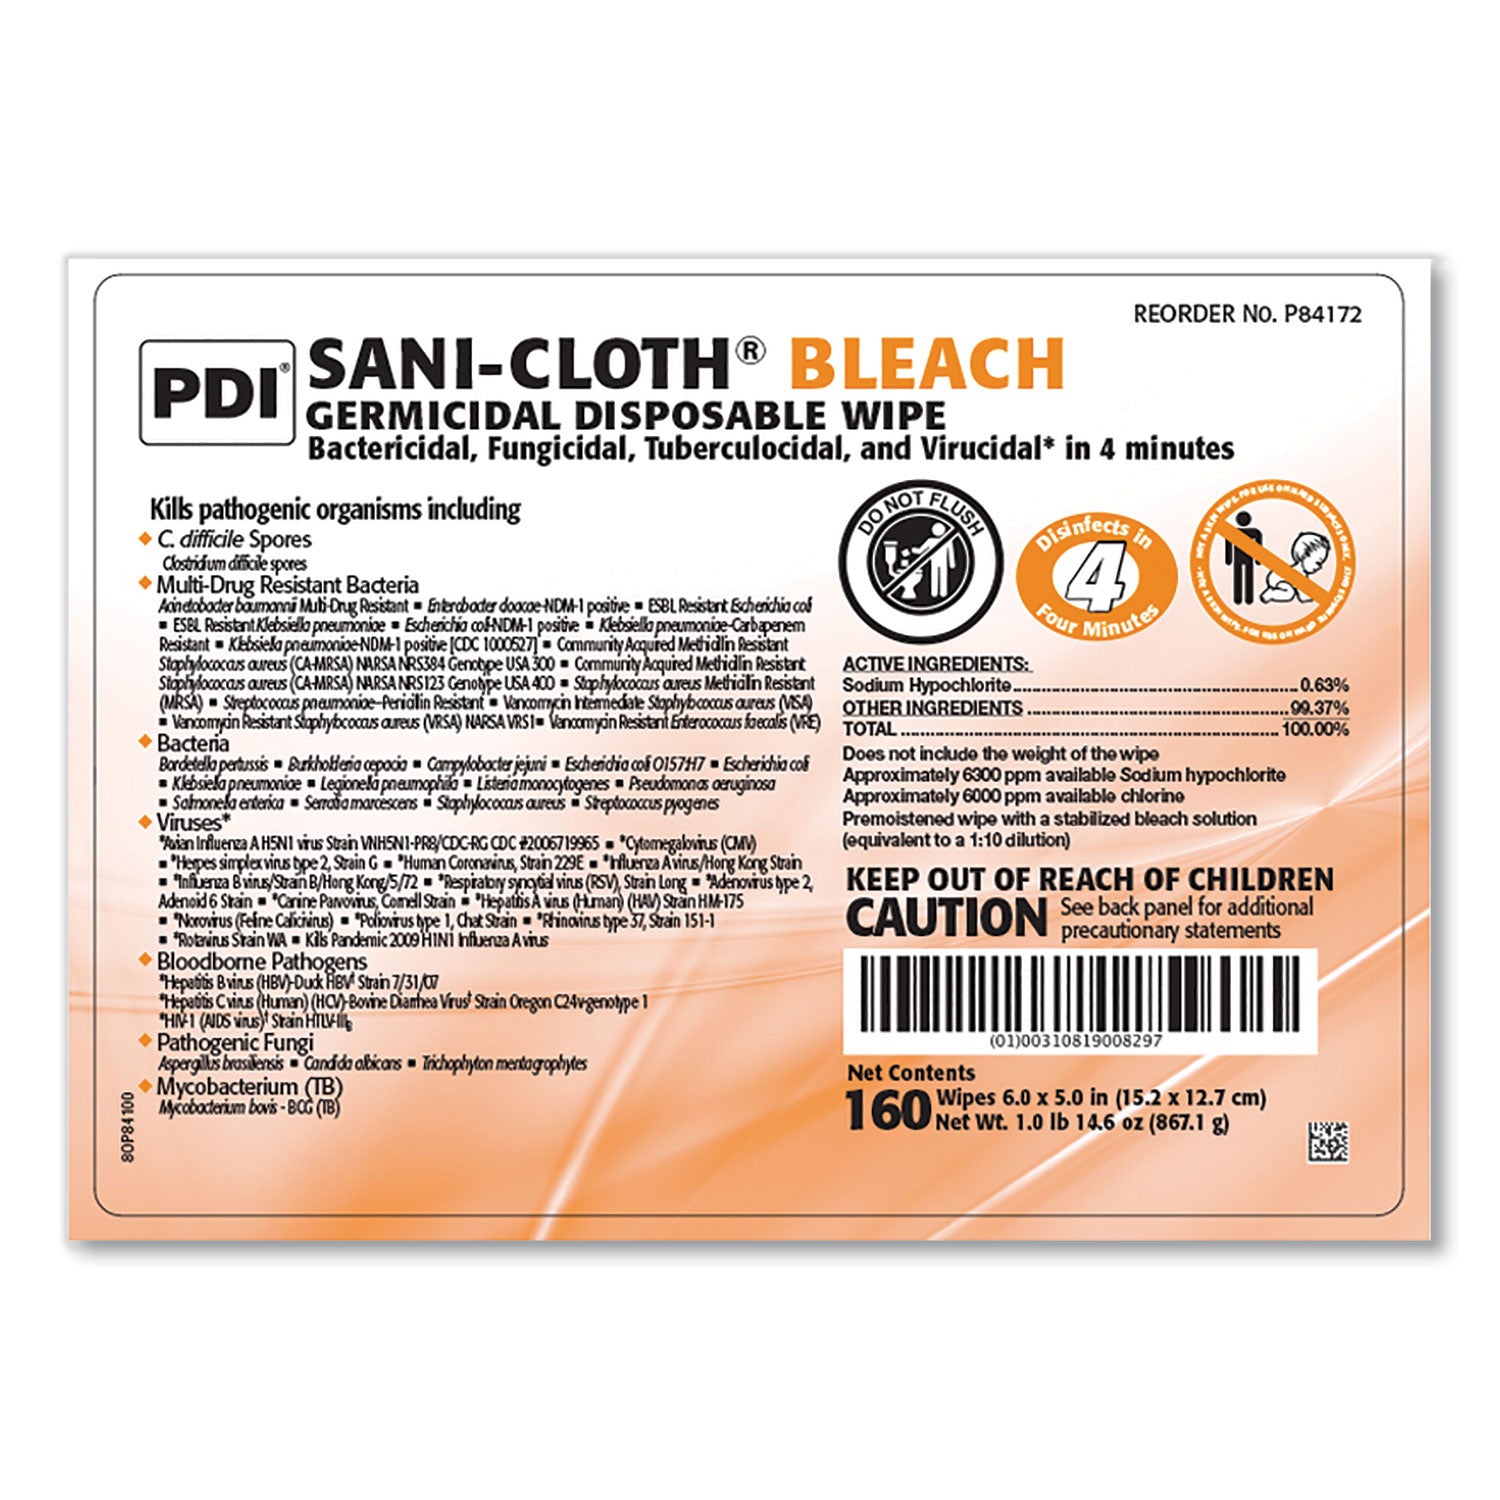 sani-cloth-bleach-germicidal-disposable-wipes-1-ply-6-x-5-unscented-white-160-canister-12-canisters-carton_pdip84172 - 2